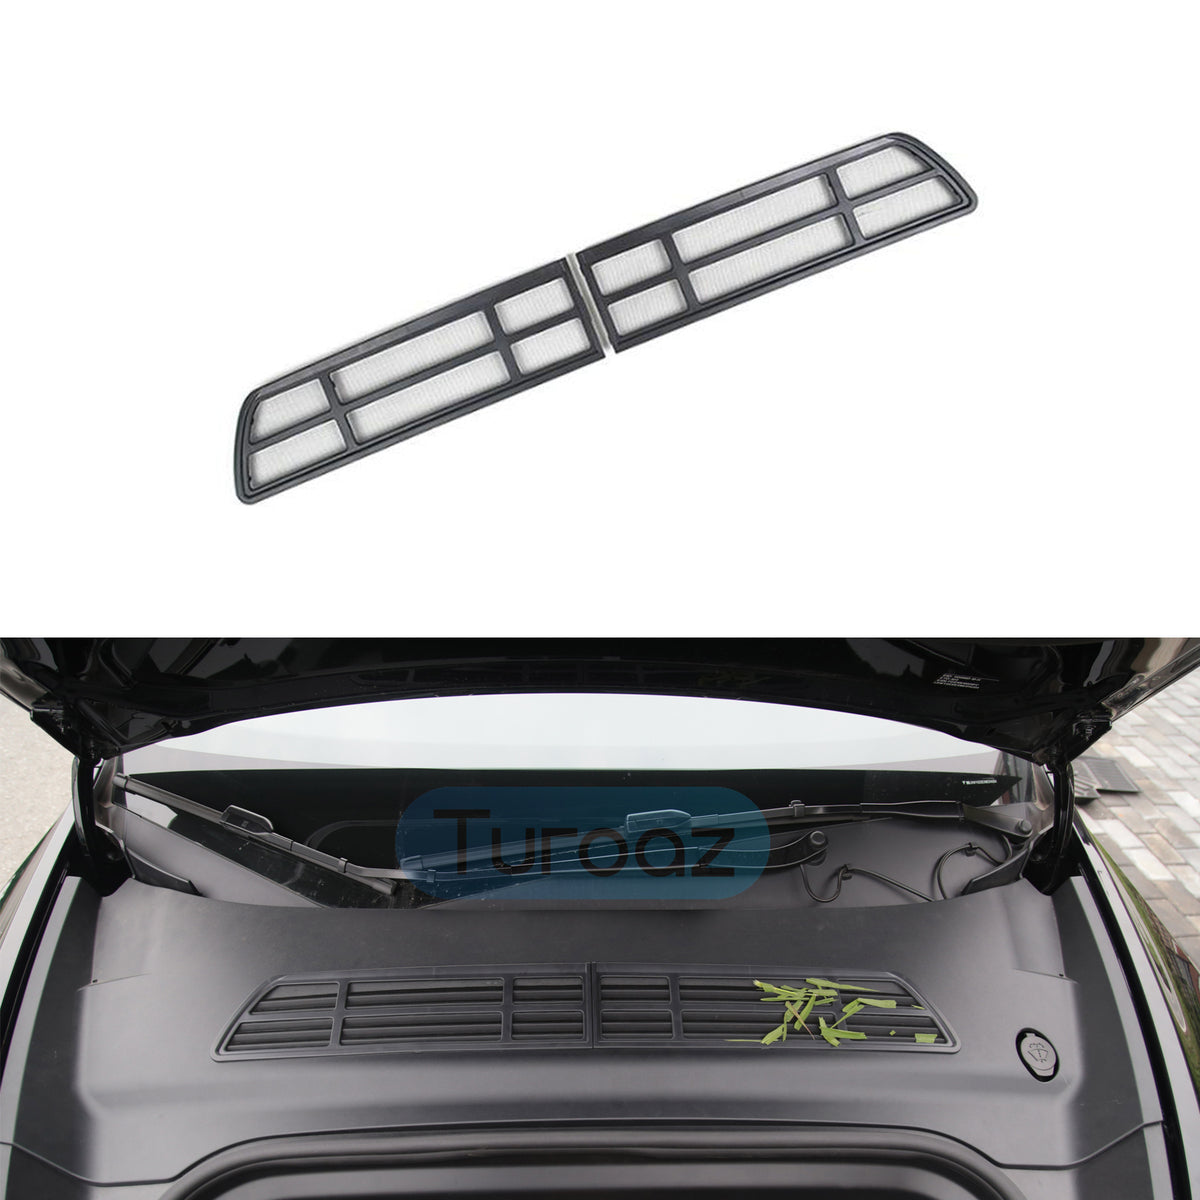 Turoaz Air Intake Grille Fit for Tesla Model Y 2021 2022 2023, ABS Plastic Air Vent Intake Air Flow Vent Cover Air Conditioning Grille Inlet Protection Car Accessories